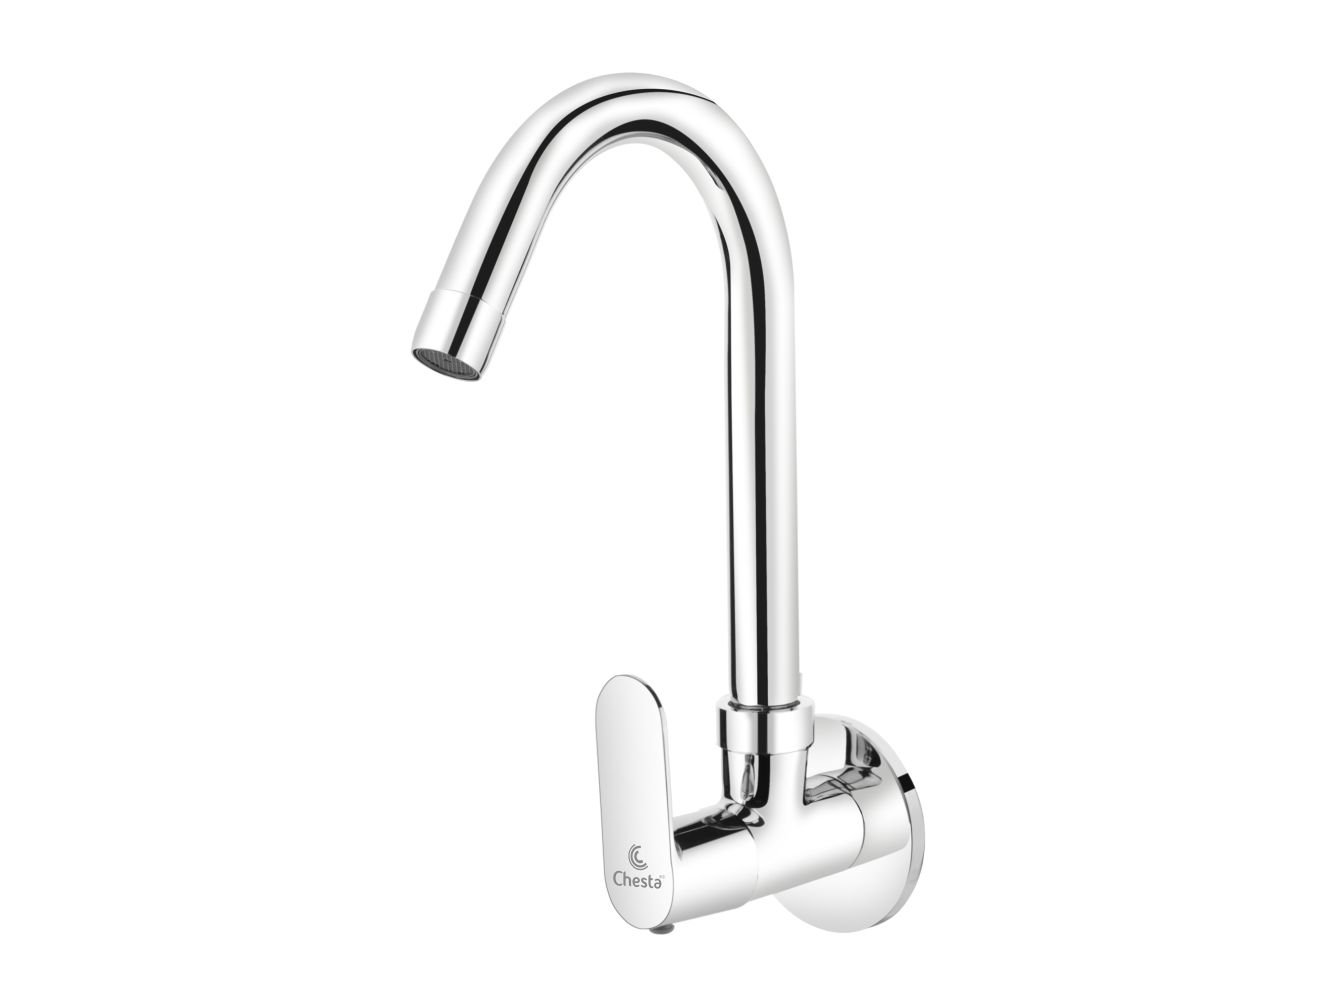 MO - 1007 - Sink Cock with Wall Flange by Chesta Bath